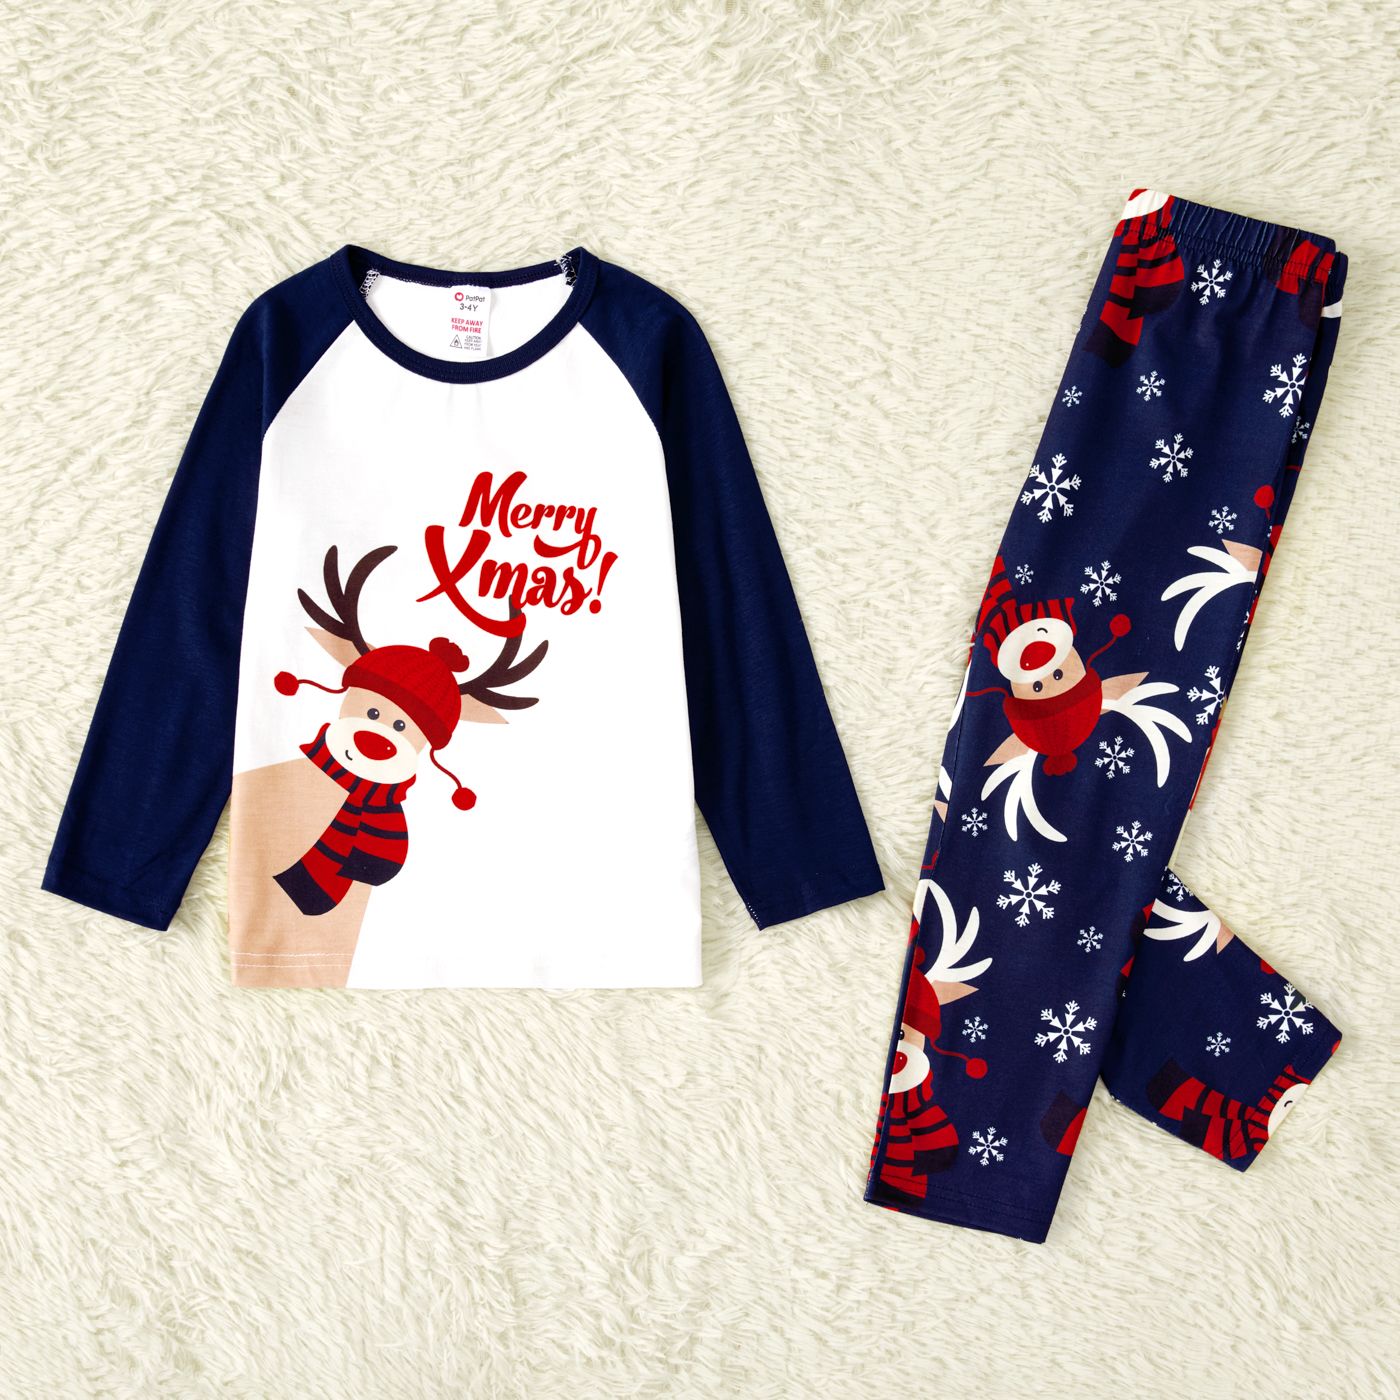 Merry Xmas Letters and Reindeer Print Navy Family Matching Long-sleeve Pajamas Sets (Flame Resistant